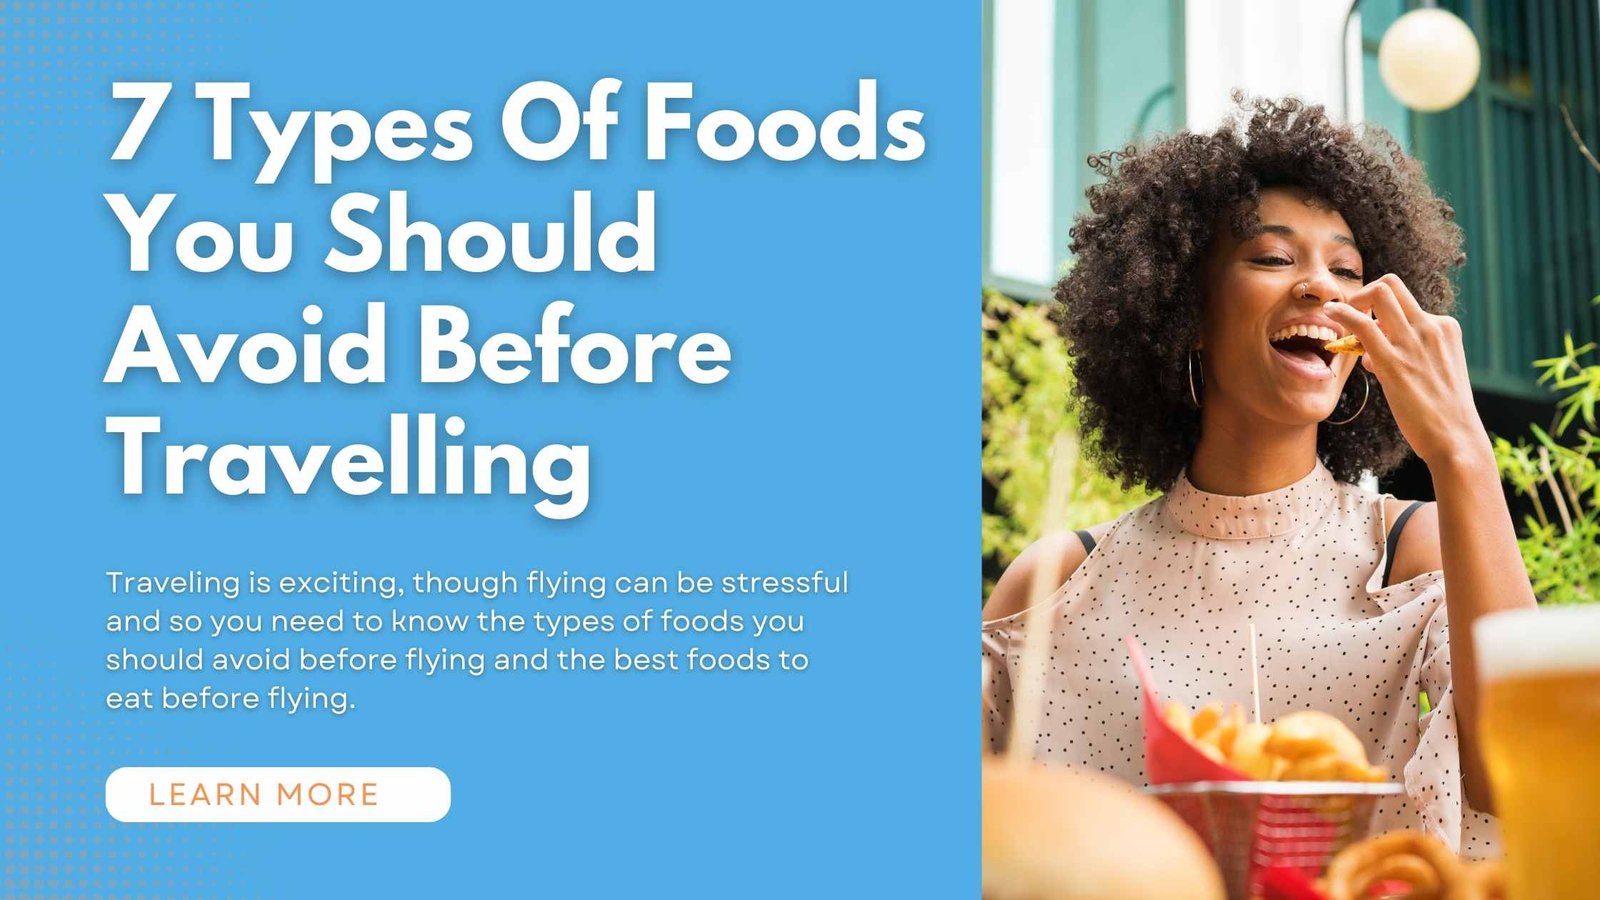 7 Types Of Foods You Should Avoid Before Flying